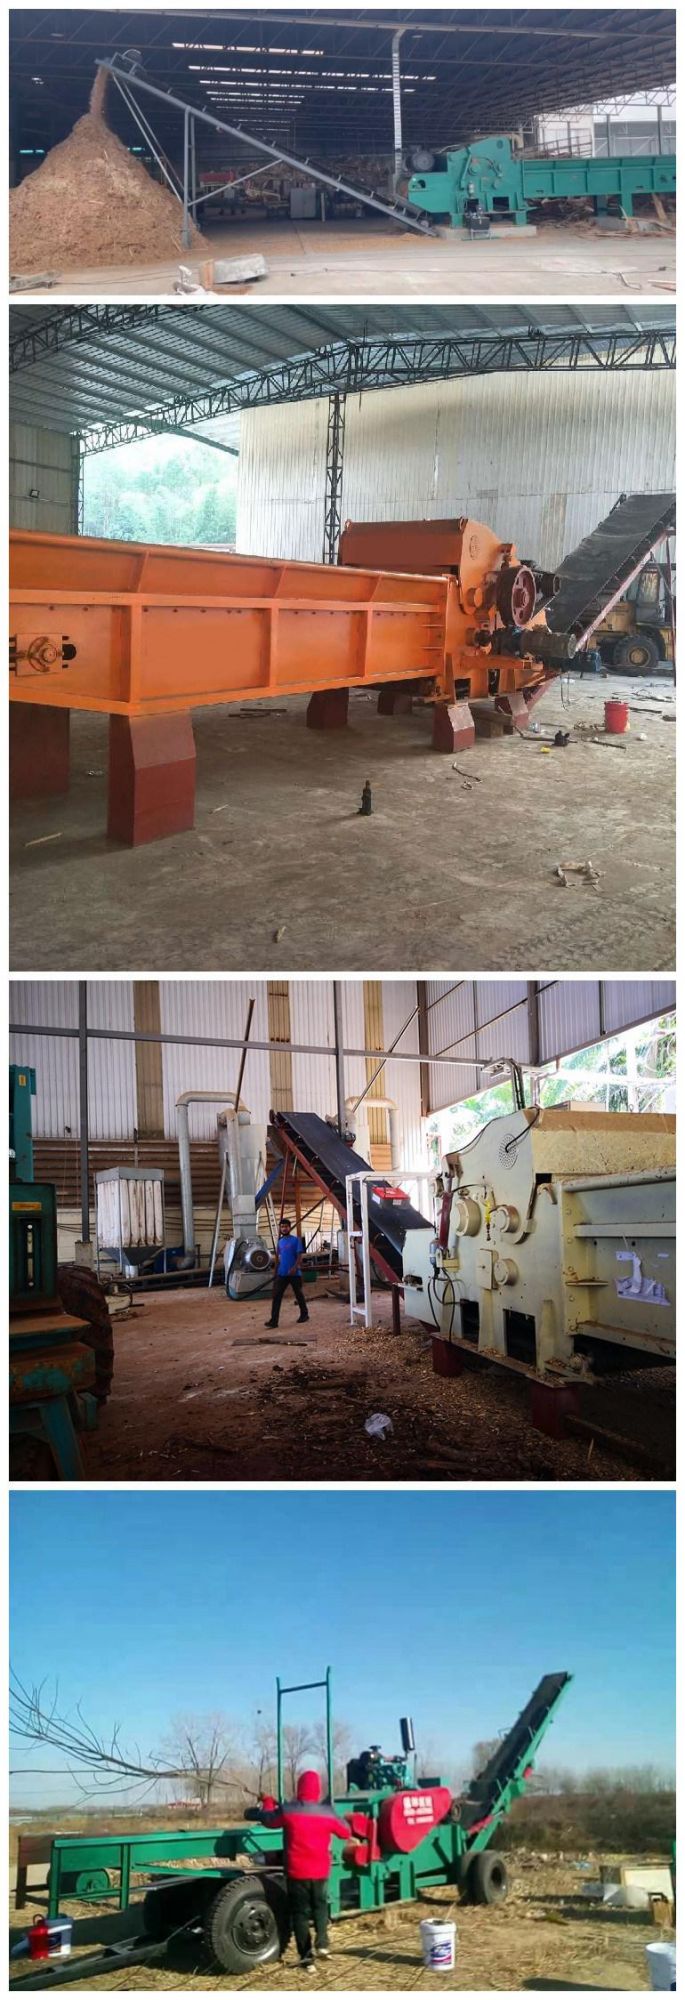 Shd Stable Performance and After-Sales Service Factory Direct Selling Wood Chipper